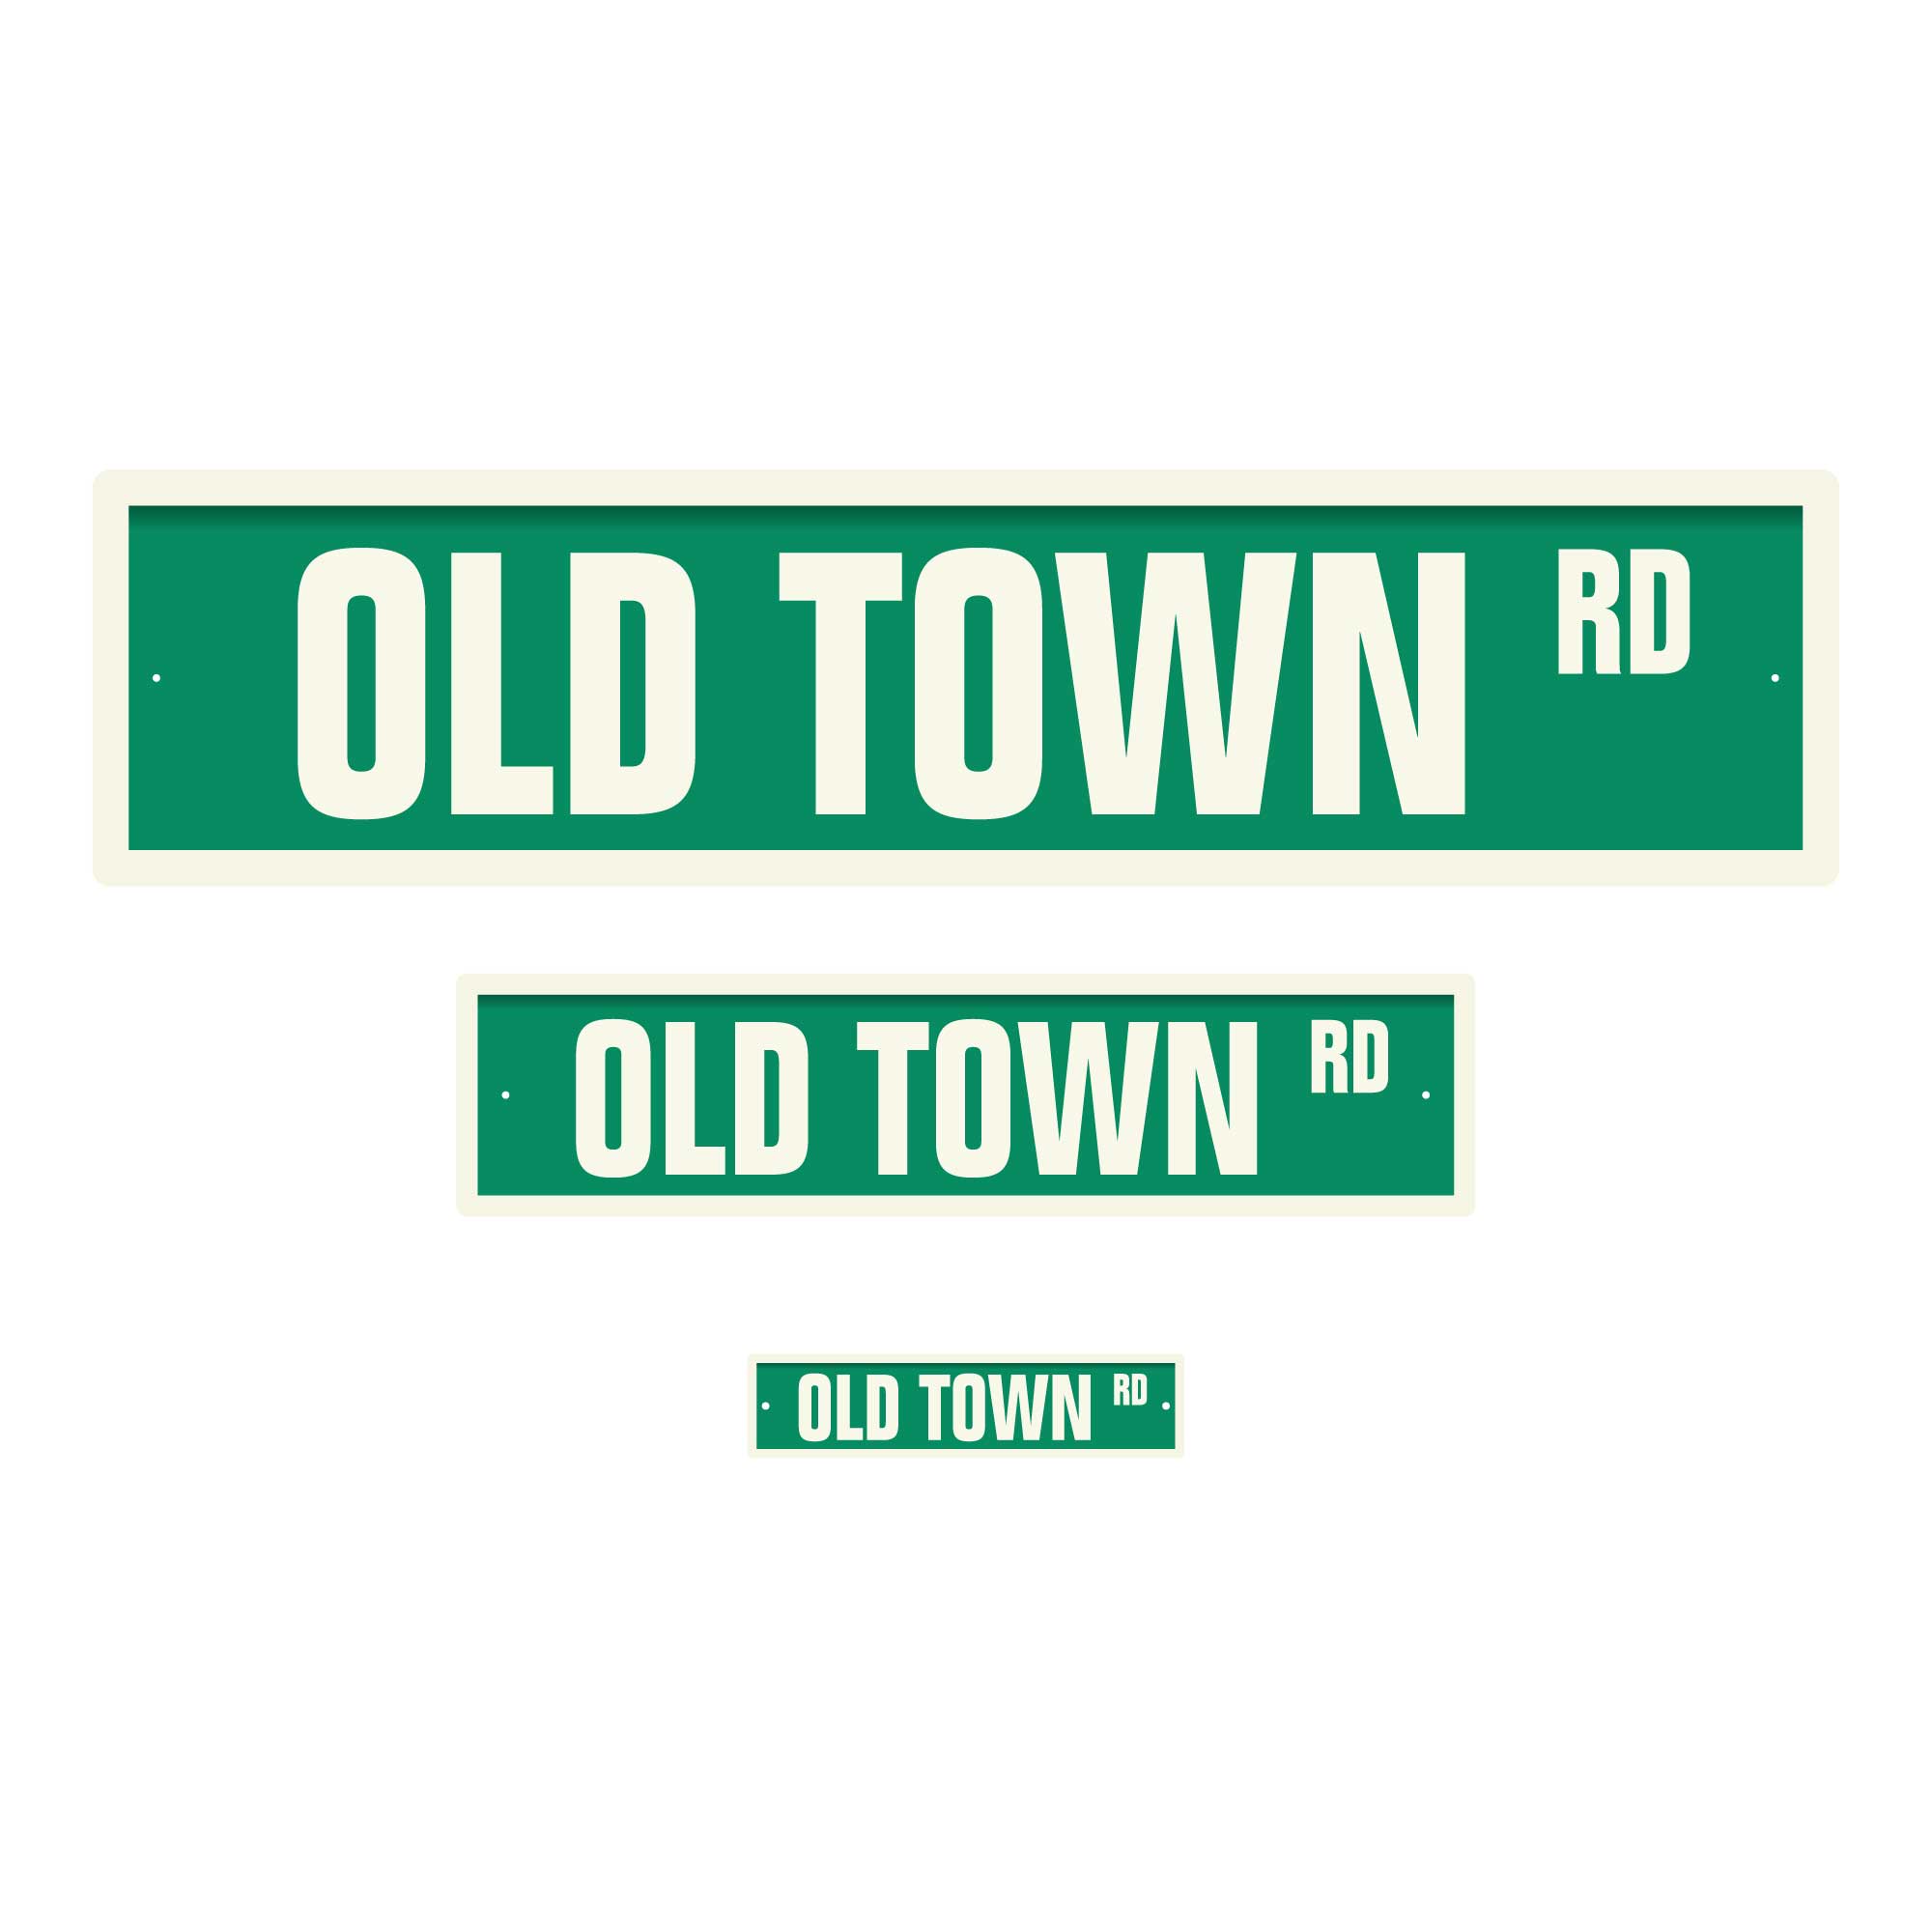 old town road 20 minute timer